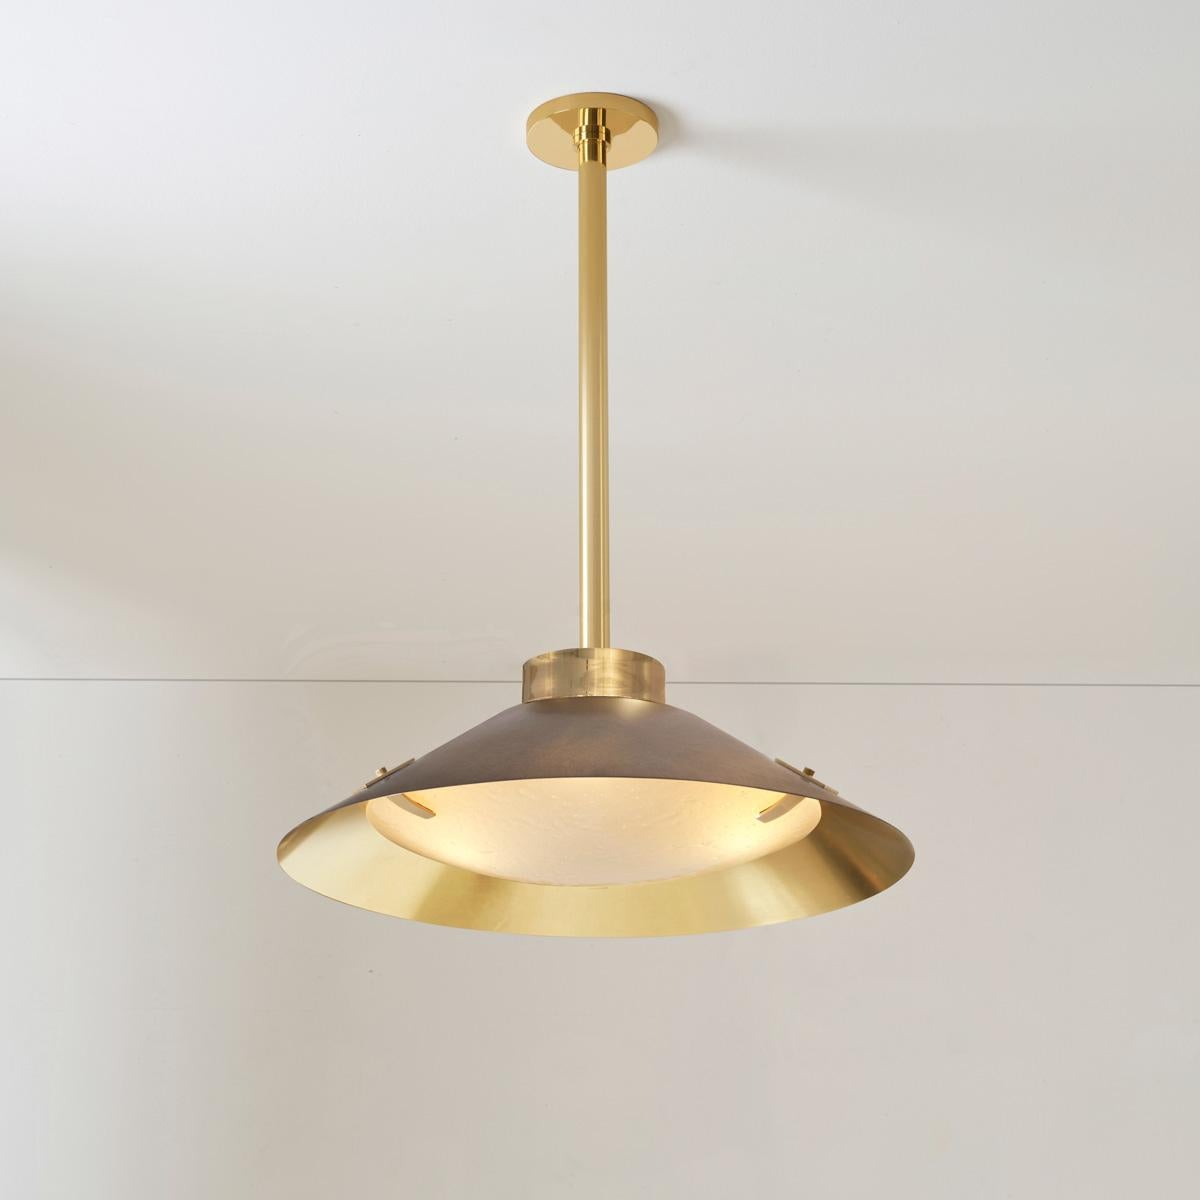 Kono Pendant by Gaspare Asaro. Satin Brass and Stone Grey For Sale 5